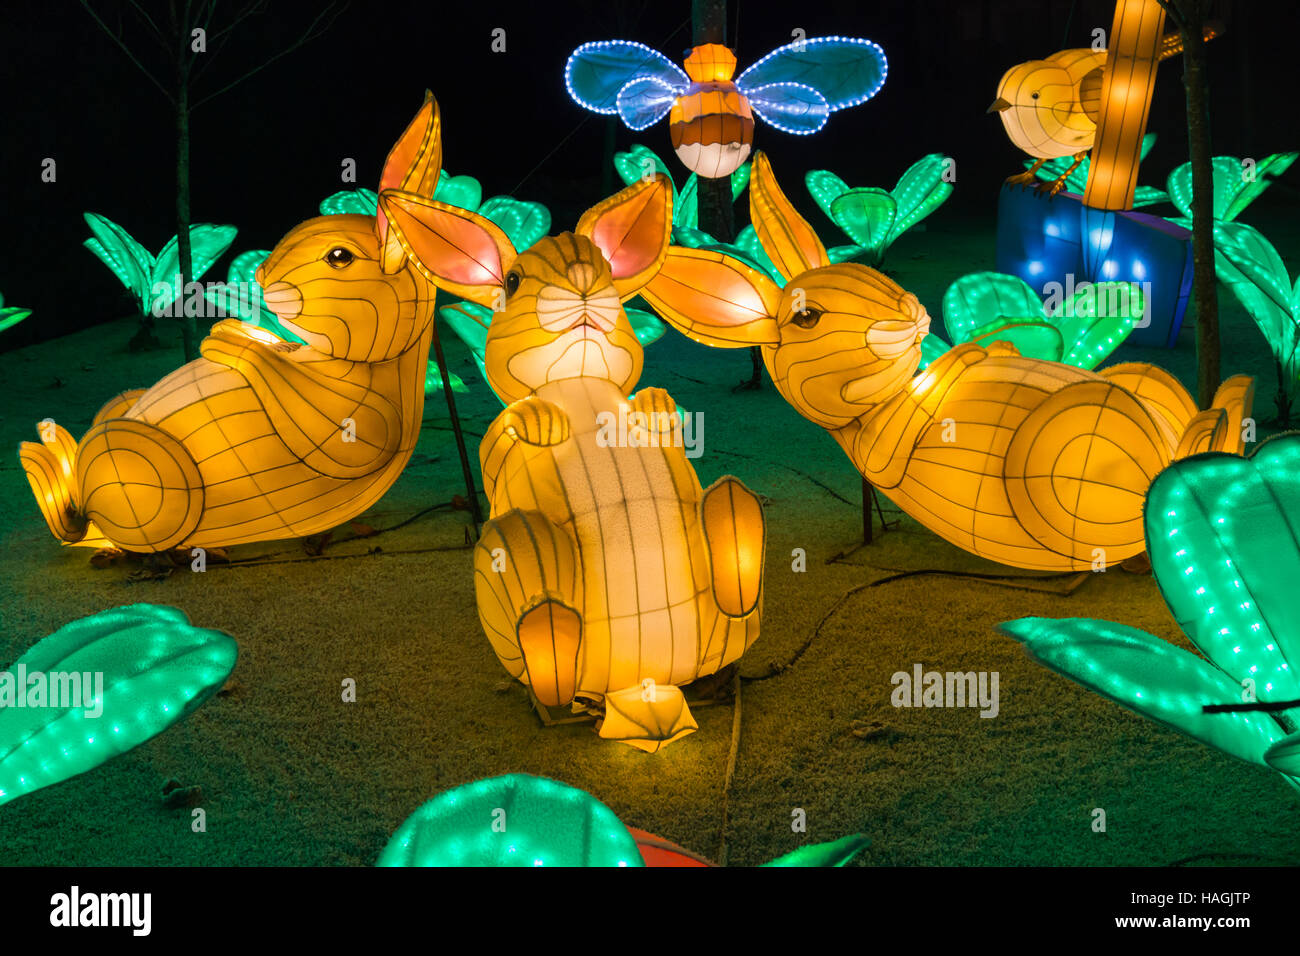 Longleat, Warminster, Wiltshire, UK. 1 December 2016. Christmas Festival of Light at Longleat to celebrate the Safari Park's 50th anniversary with the theme of Beatrix Potter. Crowds flock to see the lights on a bitter cold evening. bunny rabbits lying down in the garden Credit:  Carolyn Jenkins/Alamy Live News Stock Photo